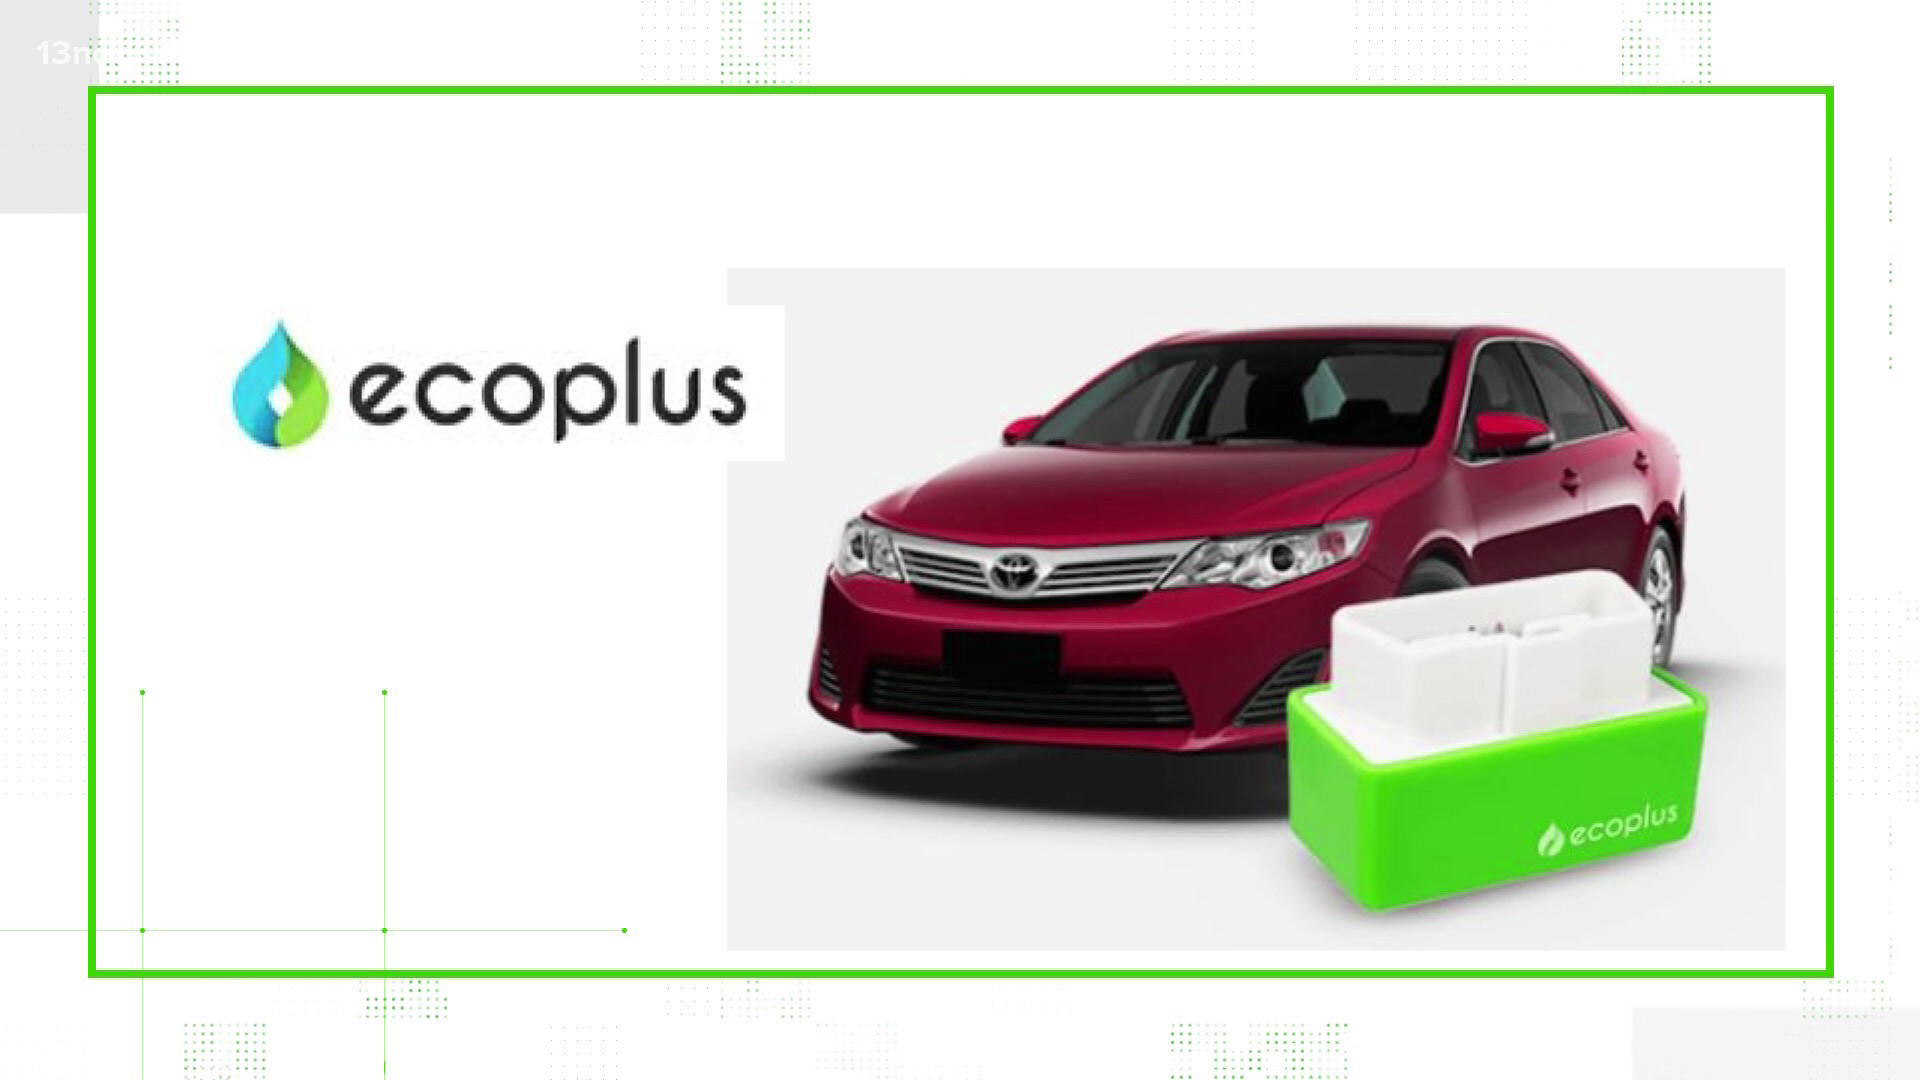 According to the company's website, using the device will reduce your fuel consumption up to 55%.